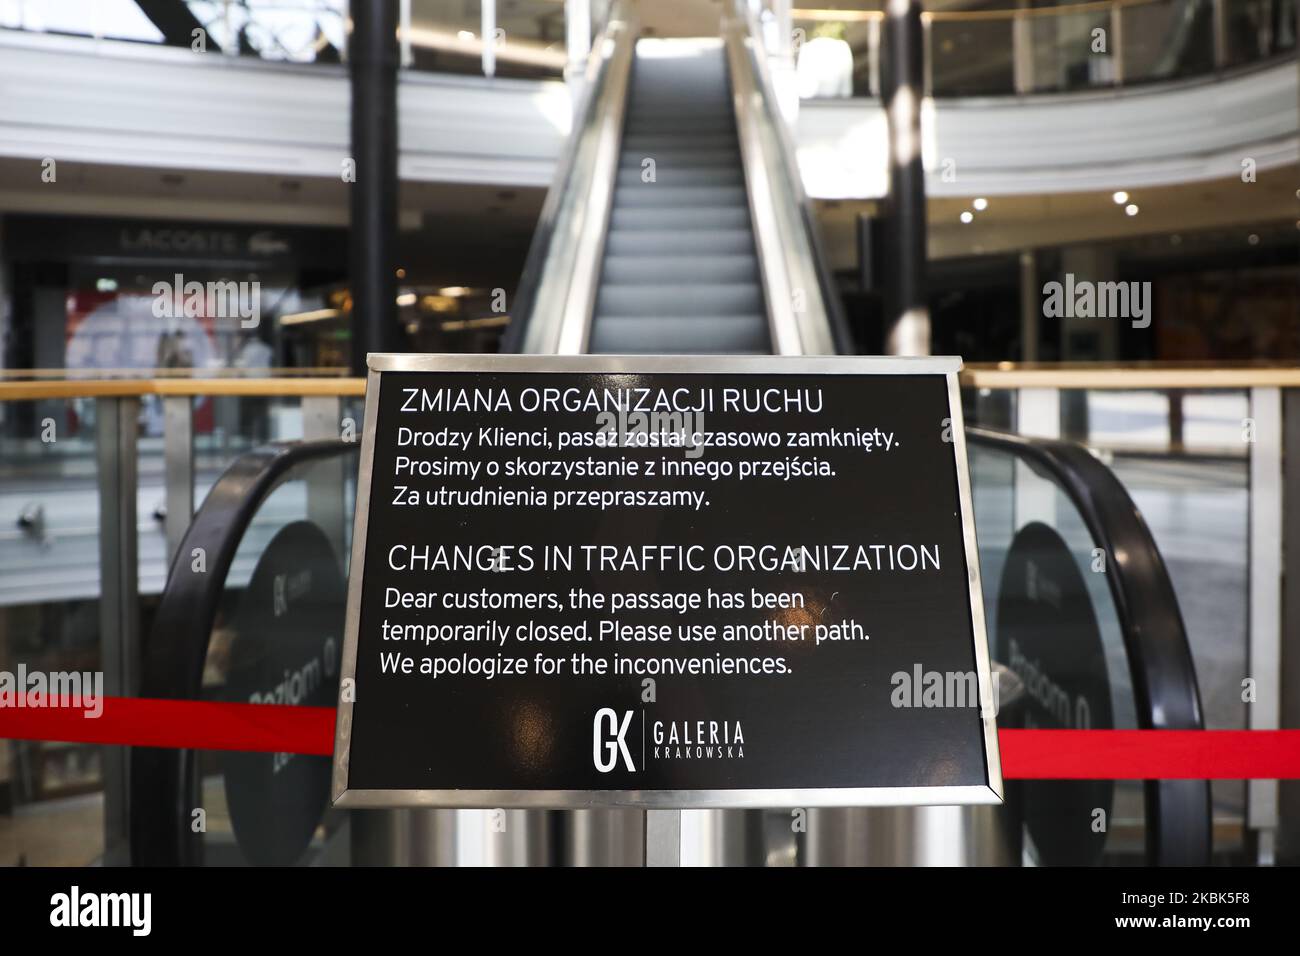 A sign with changes in traffic organization is put at escalator in Galeria Krakowska shopping mall in Krakow, Poland on March 17, 2020. Due to the spread of coronavirus the Polish Prime Minister has introduced a state of emergency, which includes closing schools and universities, controls on the country's borders and restrictions imposed on services such as museums, restaurants, pubs and shopping malls. (Photo by Beata Zawrzel/NurPhoto) Stock Photo